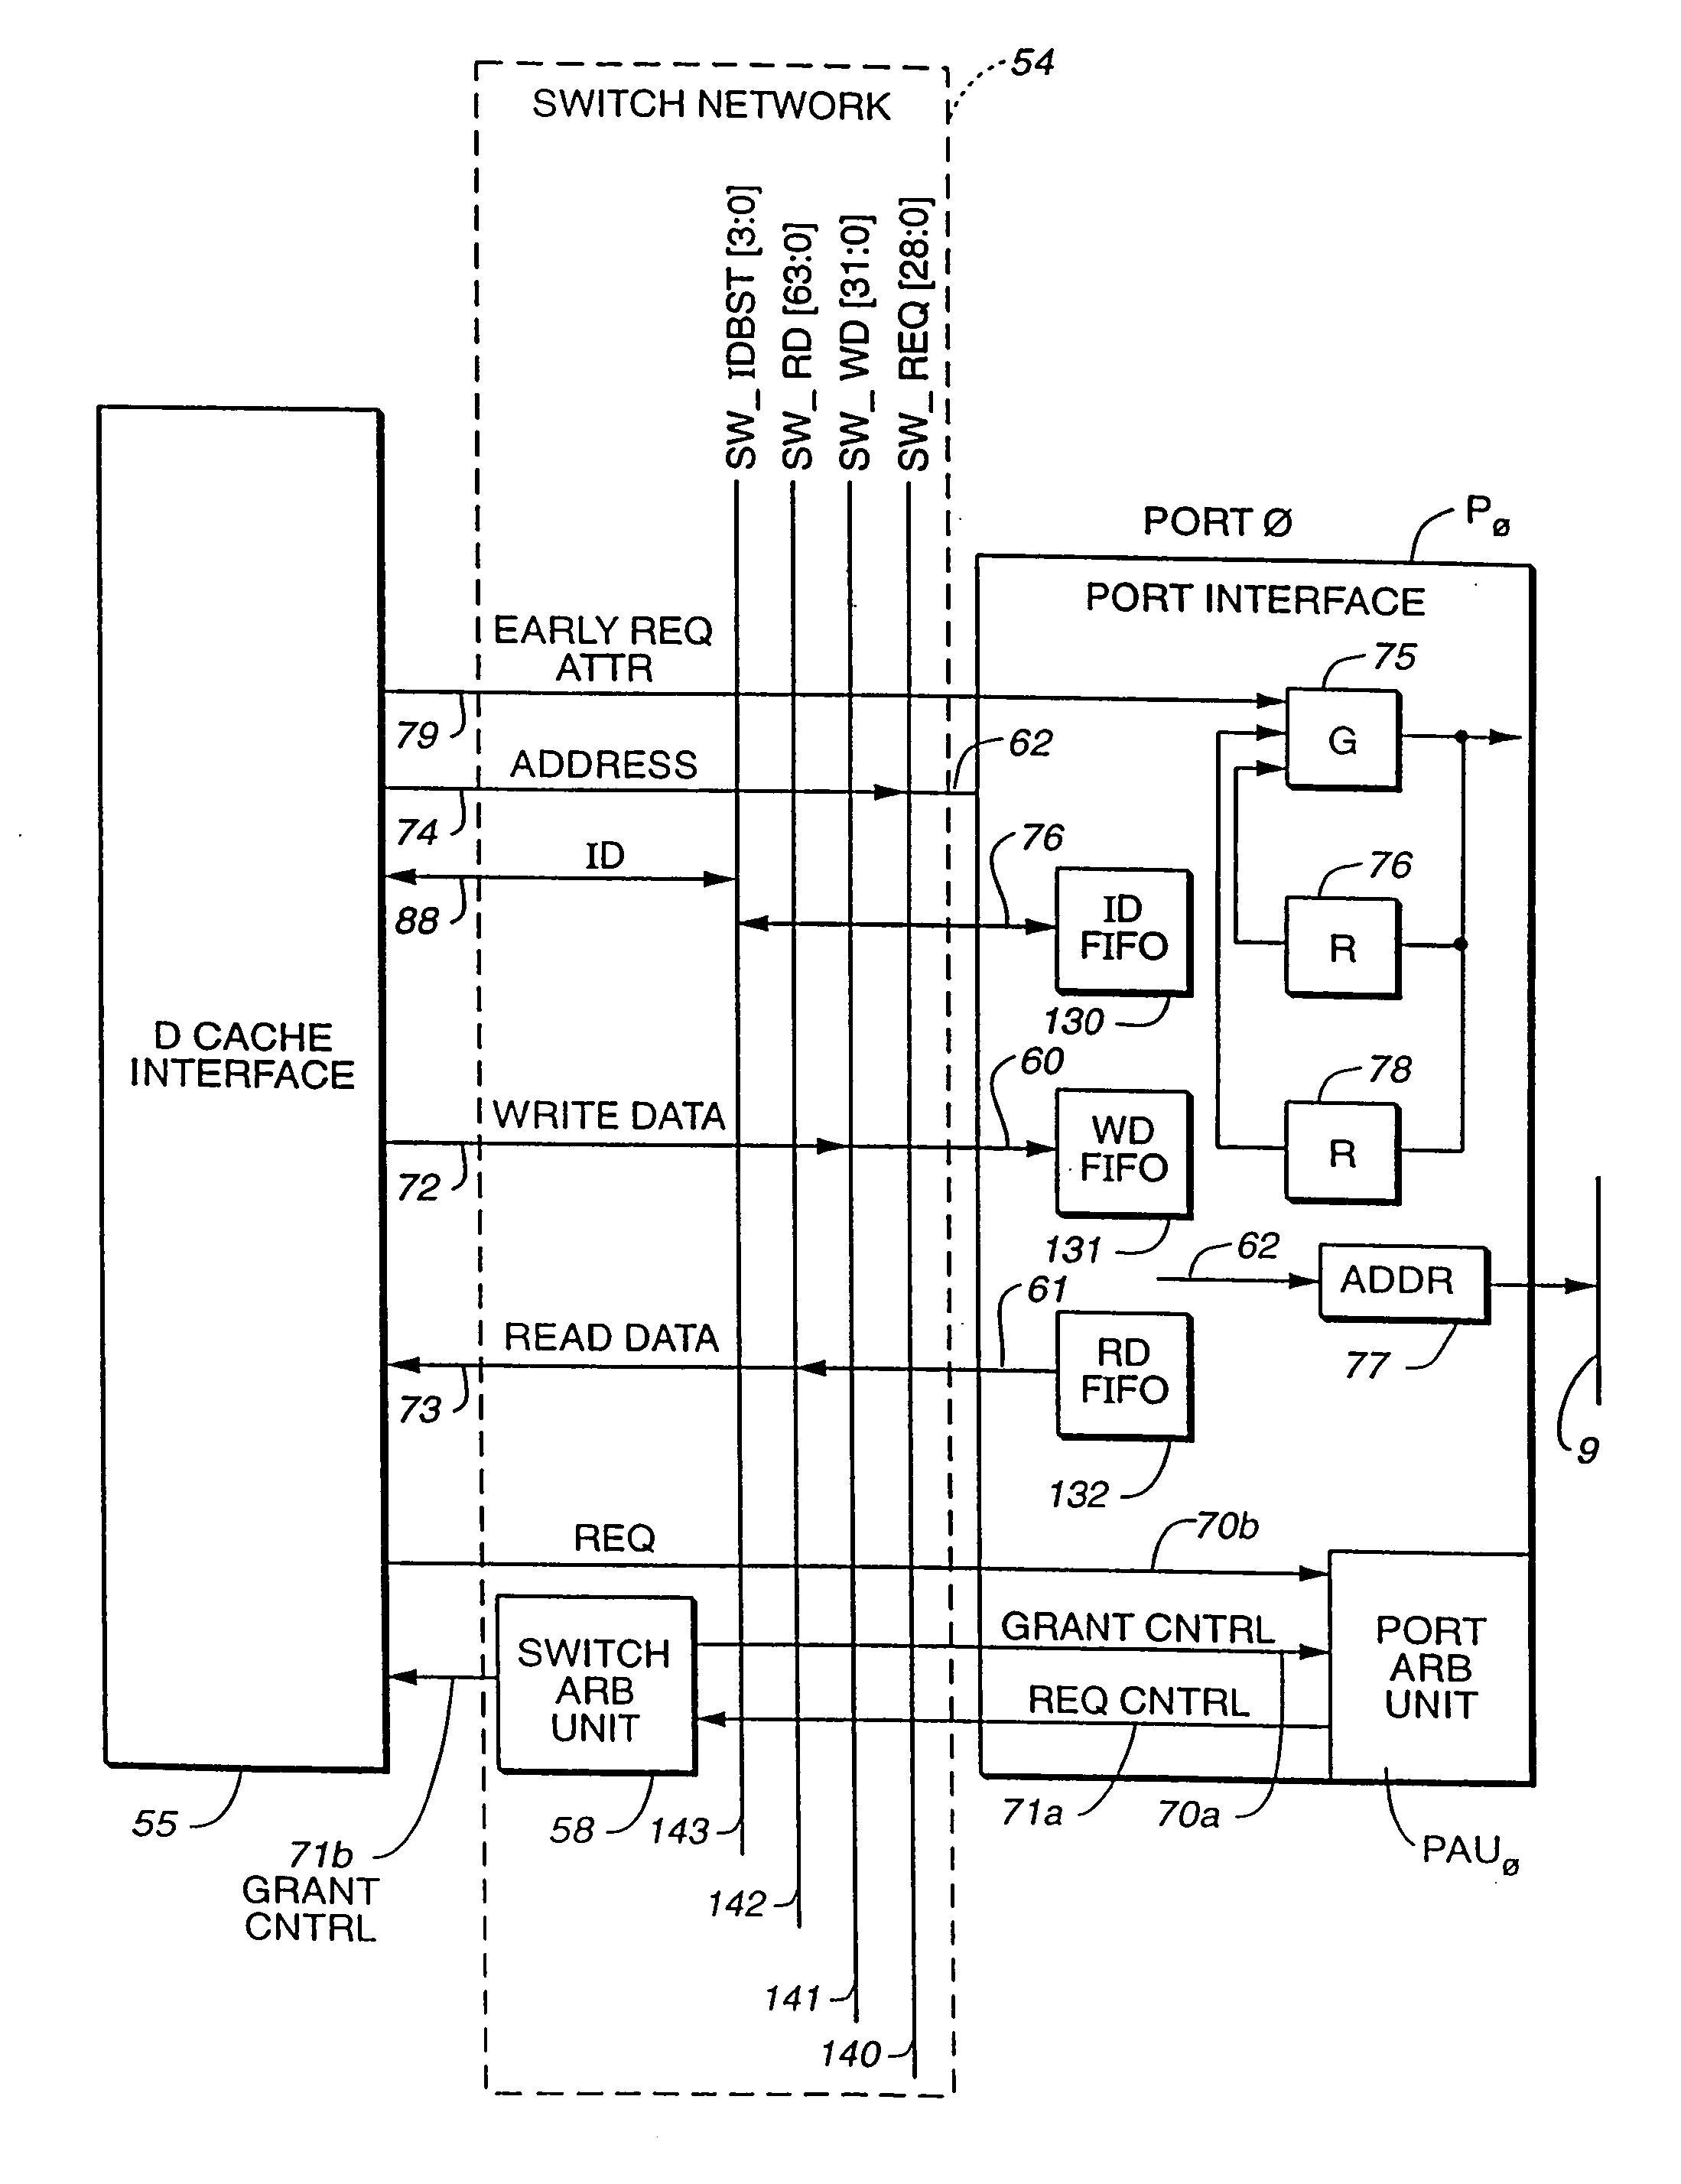 Microprocessor architecture capable of supporting multiple heterogeneous processors